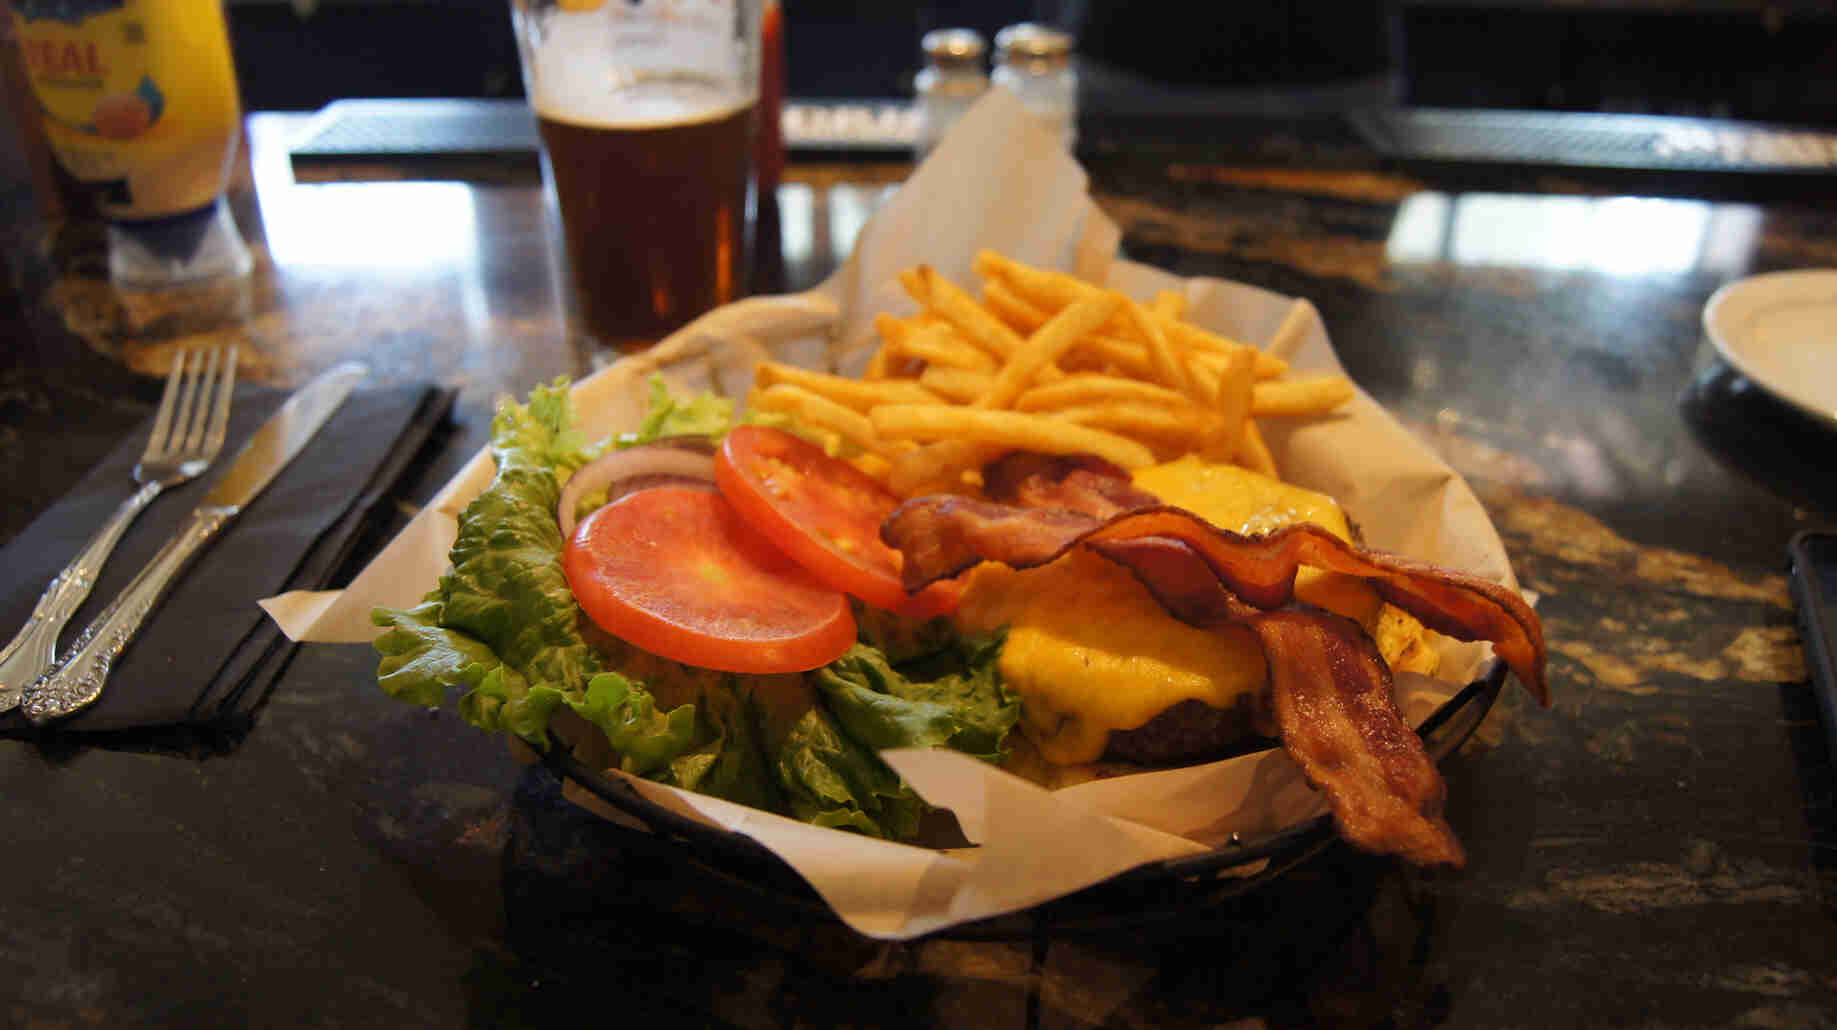 A food basket, with burger and fries, on a bar top